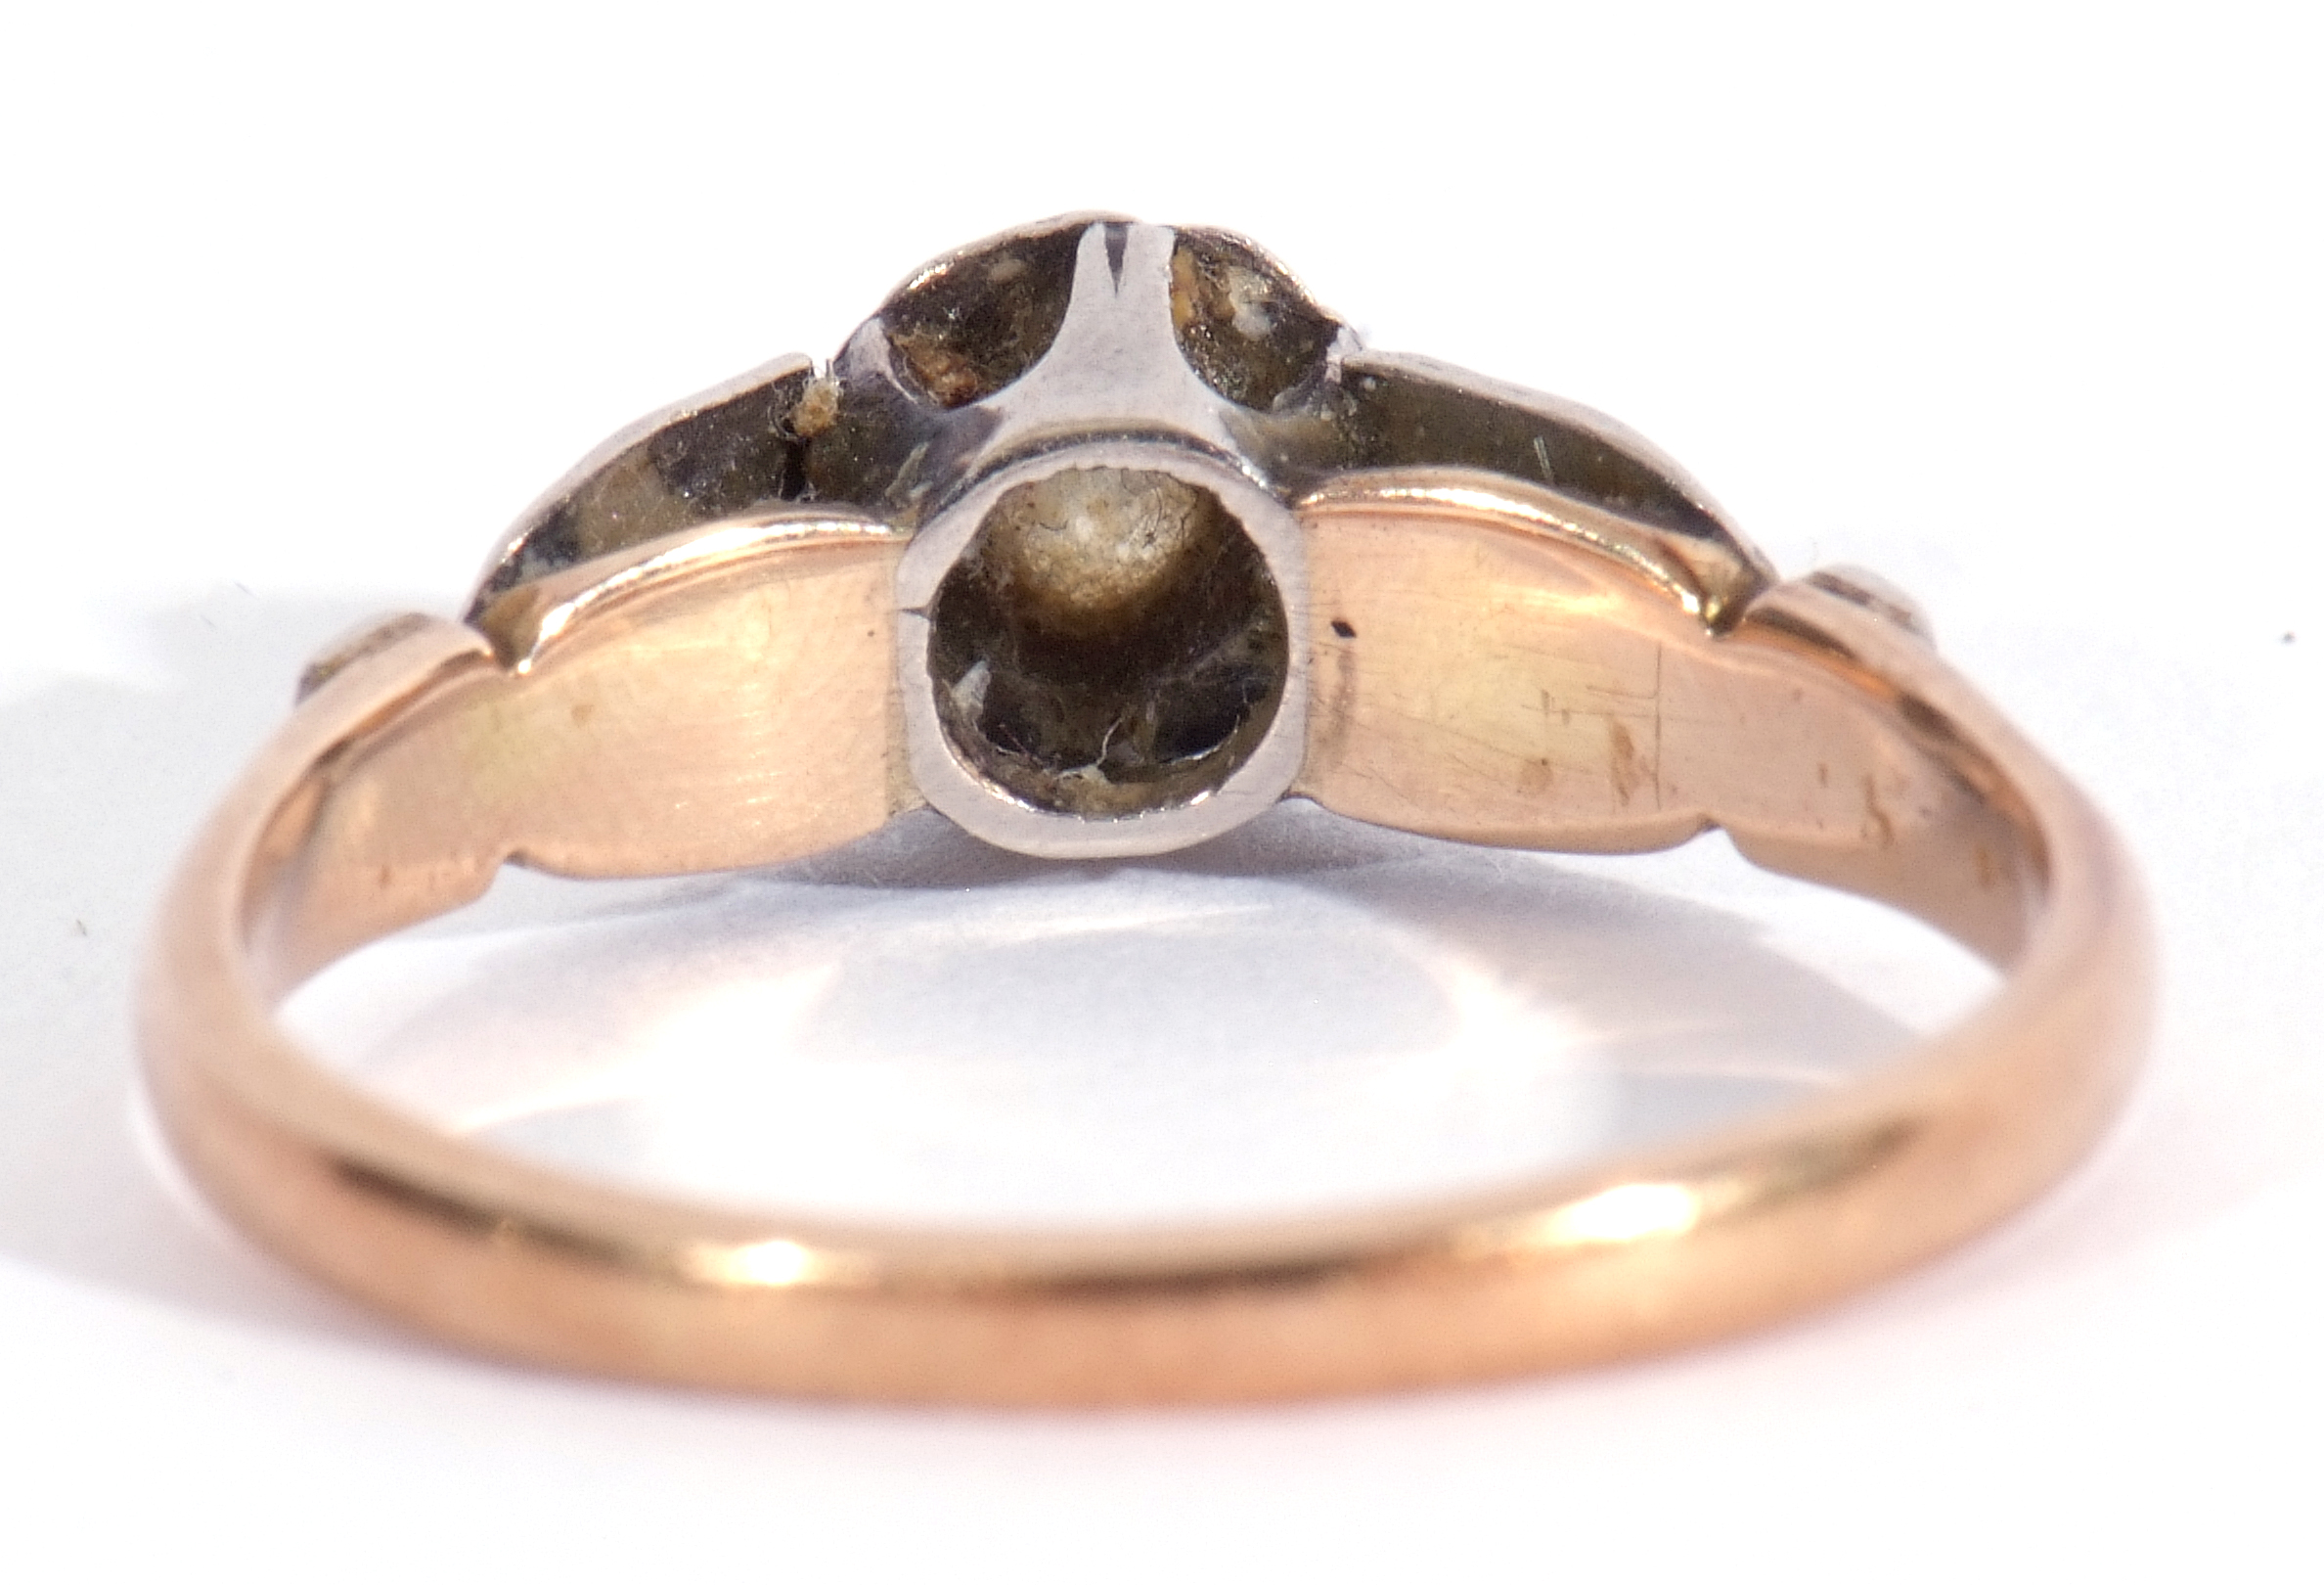 Diamond single stone ring featuring a small old cut diamond in illusion setting raised between - Image 3 of 6